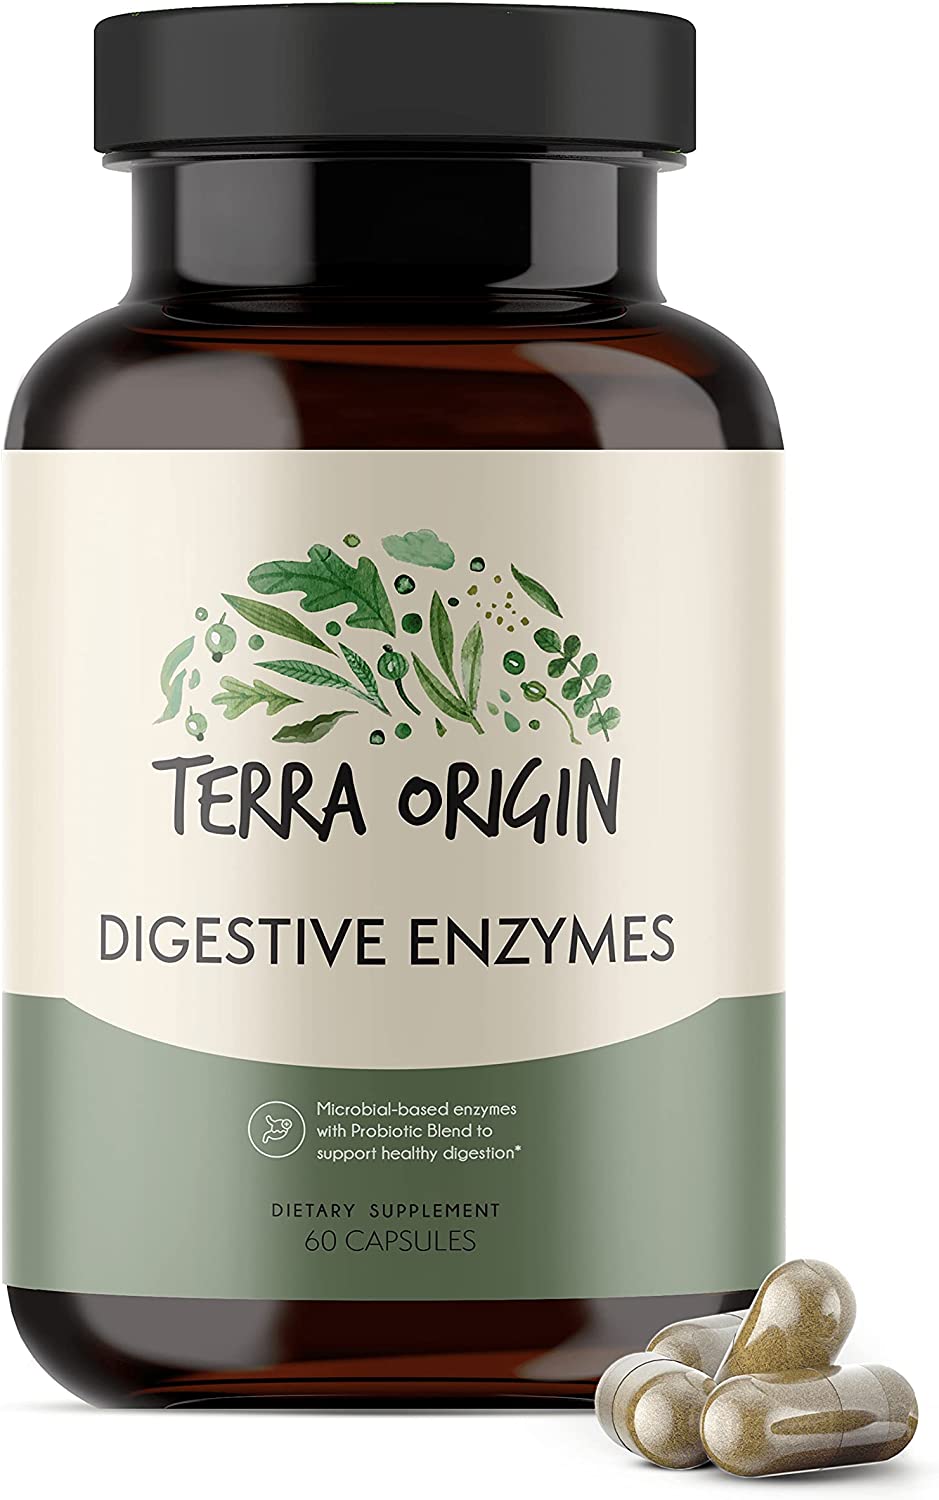 TERRA ORIGIN DIGESTIVE ENZYMES WITH PROBIOTICS capsules were designed to provide your body with a balanced enzyme blend to help break down food and protect your digestive tract. The probiotics help to support a healthy balance of bacteria in your gut, while the enzymes help to digest food. EACH CAPSULE CONTAINS: Protease – to digest protein Lipase – to digest fat Amylase – to digest starch Cellulase – to digest fiber Xylanase – to digest fiber Beta Glucanase – to digest fiber Invertase – to digest sugar Lactase – to digest lactose Phytase – to digest phytic acid The capsules are easy to swallow and help to ease digestion.